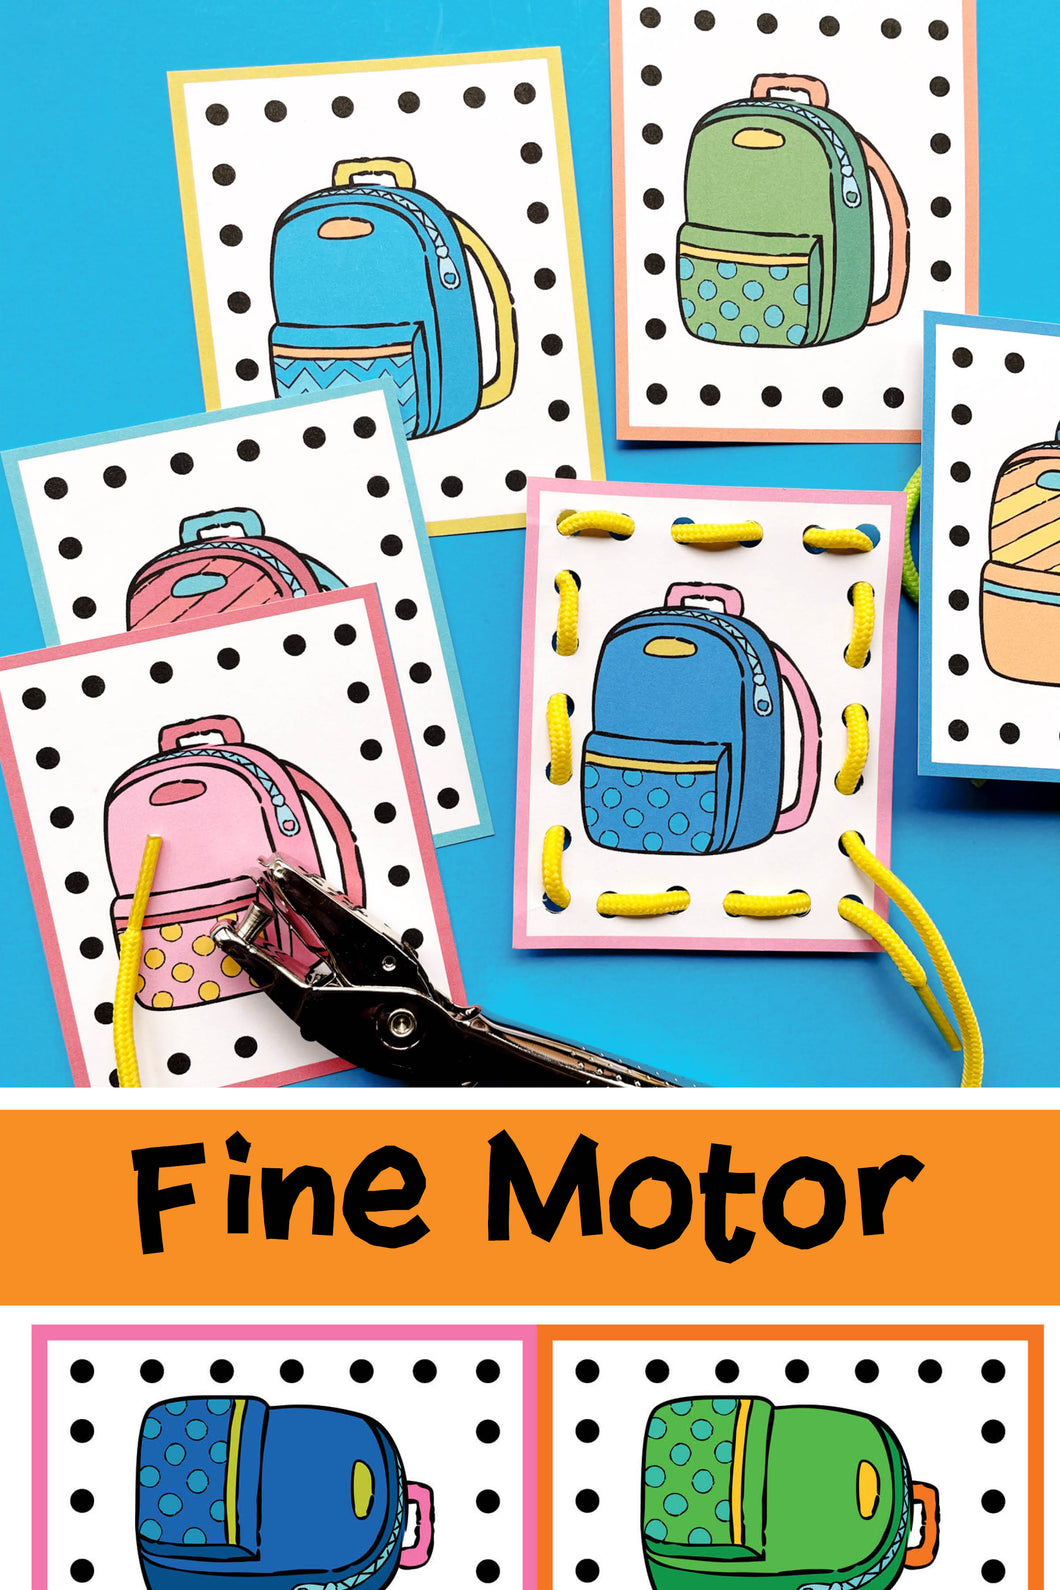 Printable fine motor activity. Your preschoolers will love punching the holes and lacing up these cards. 